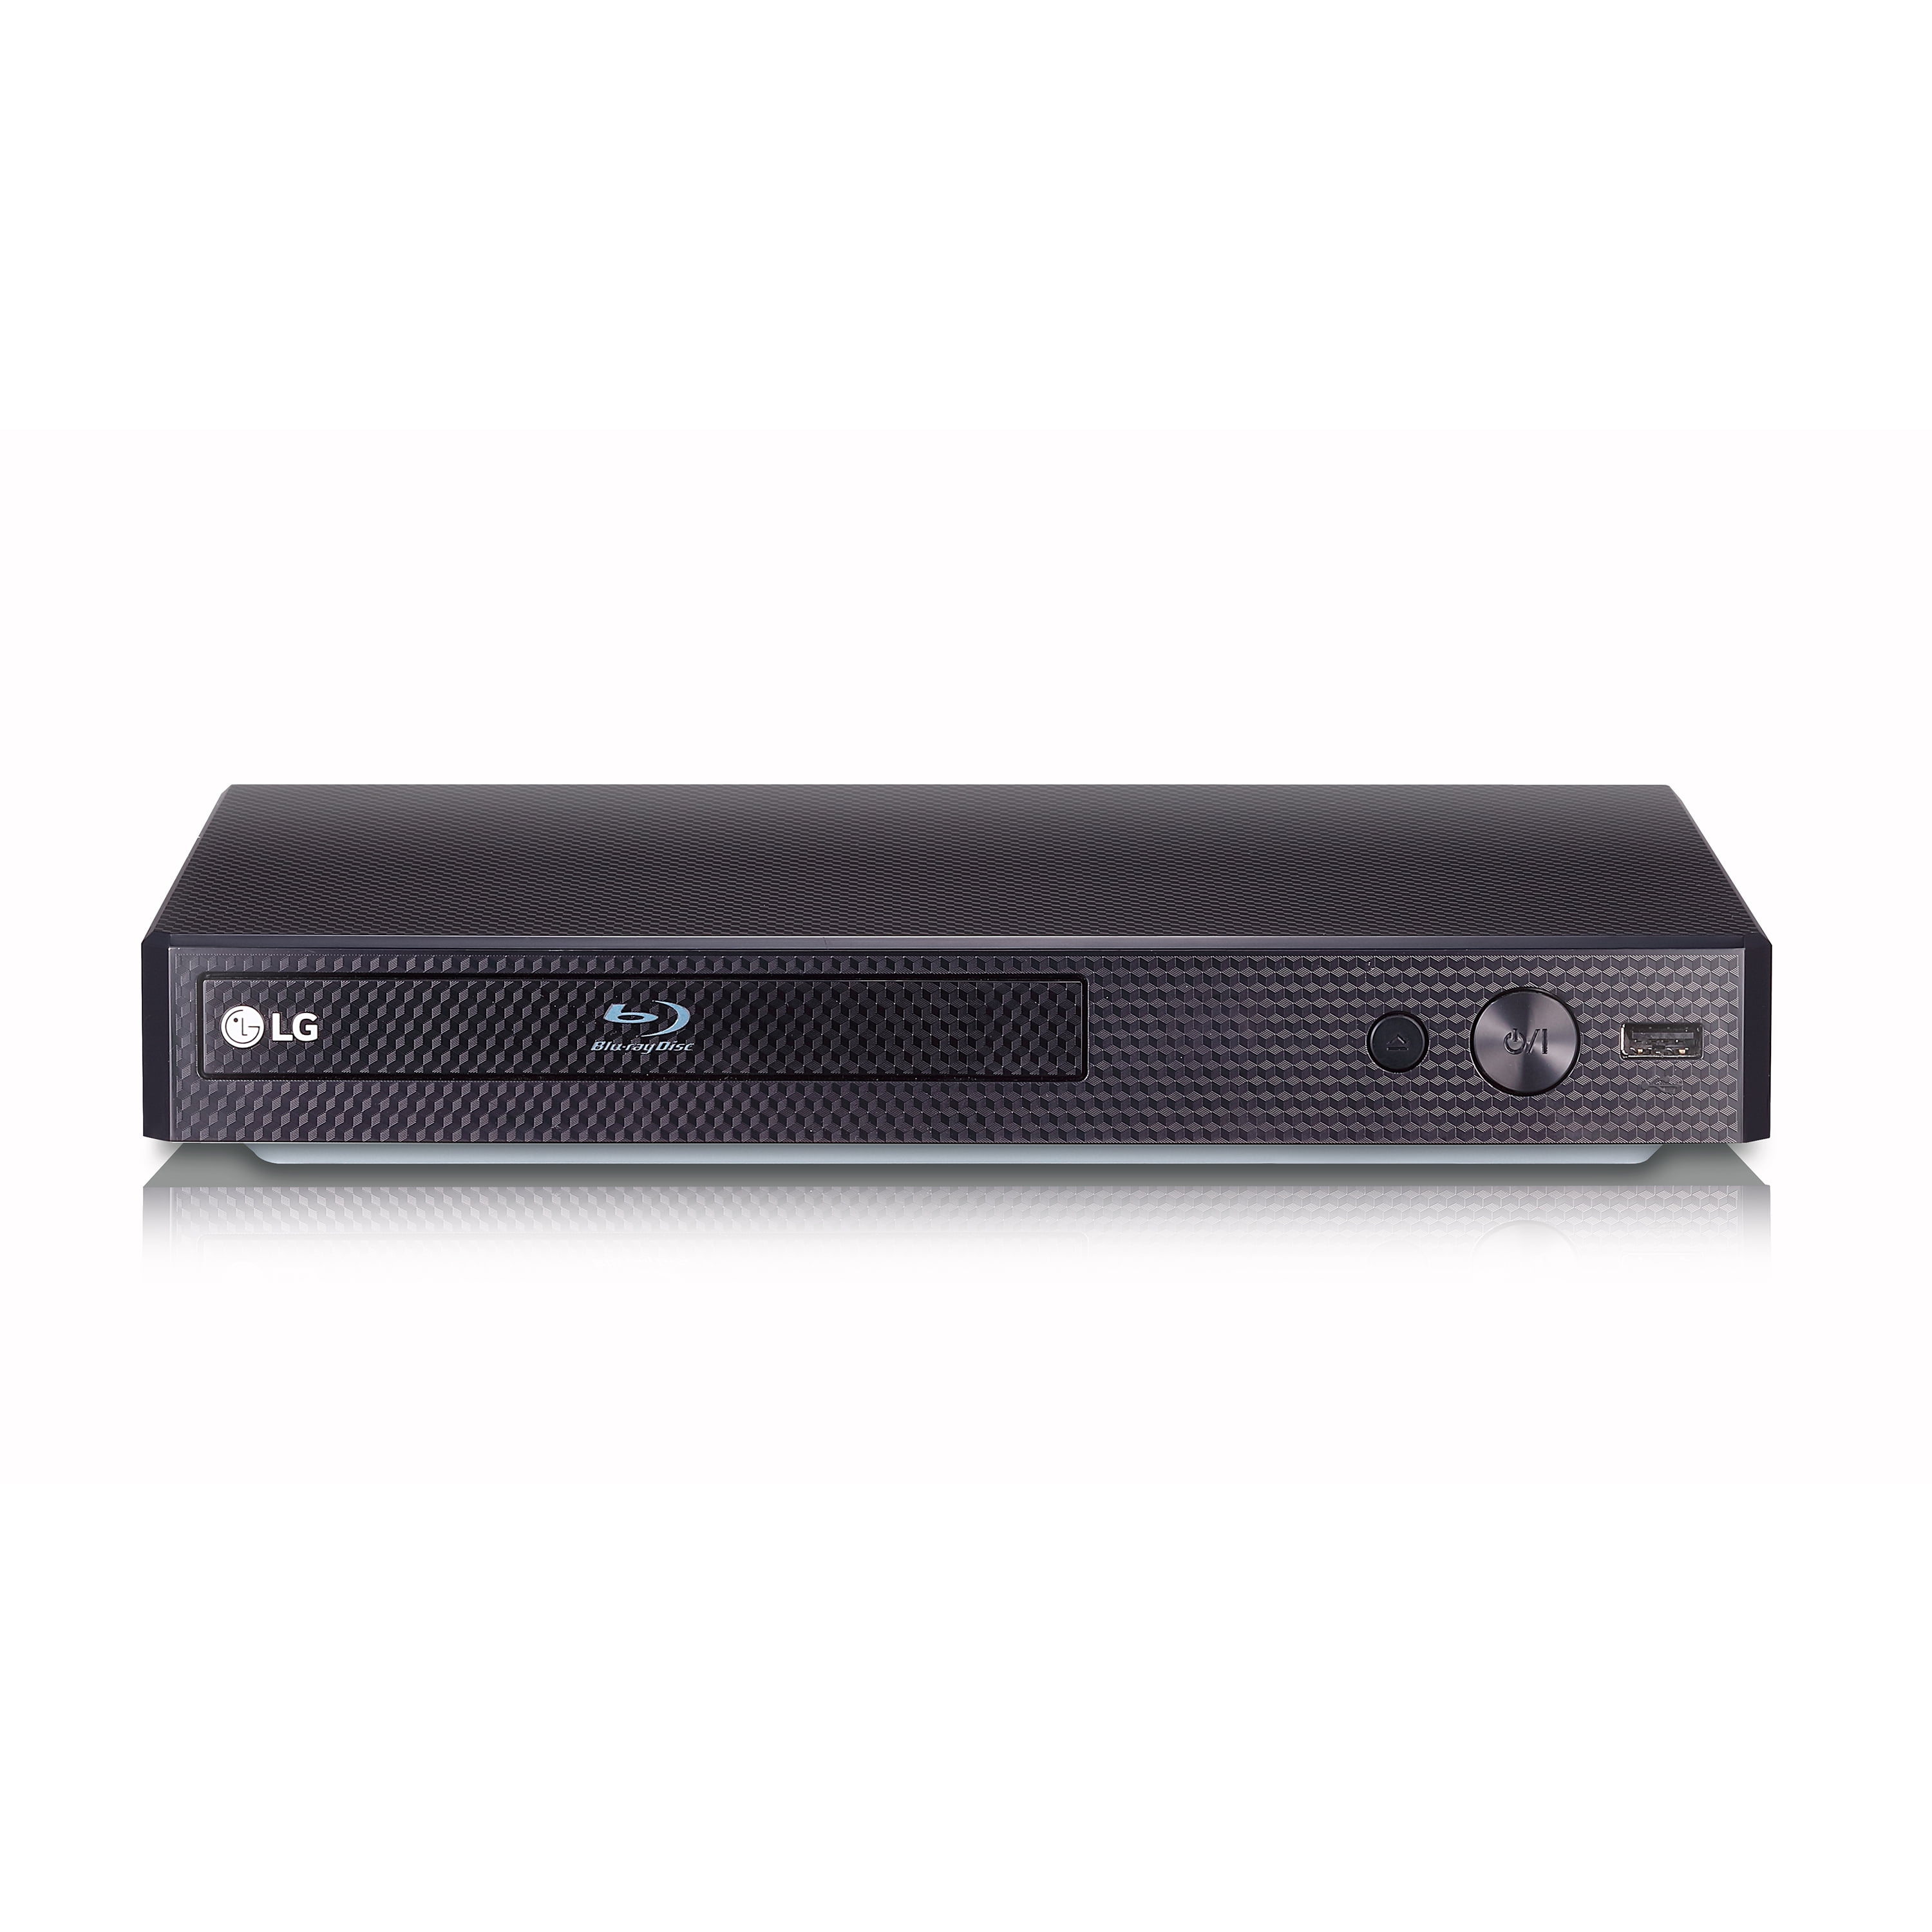 LG DVD Player with Semi-karaoke support